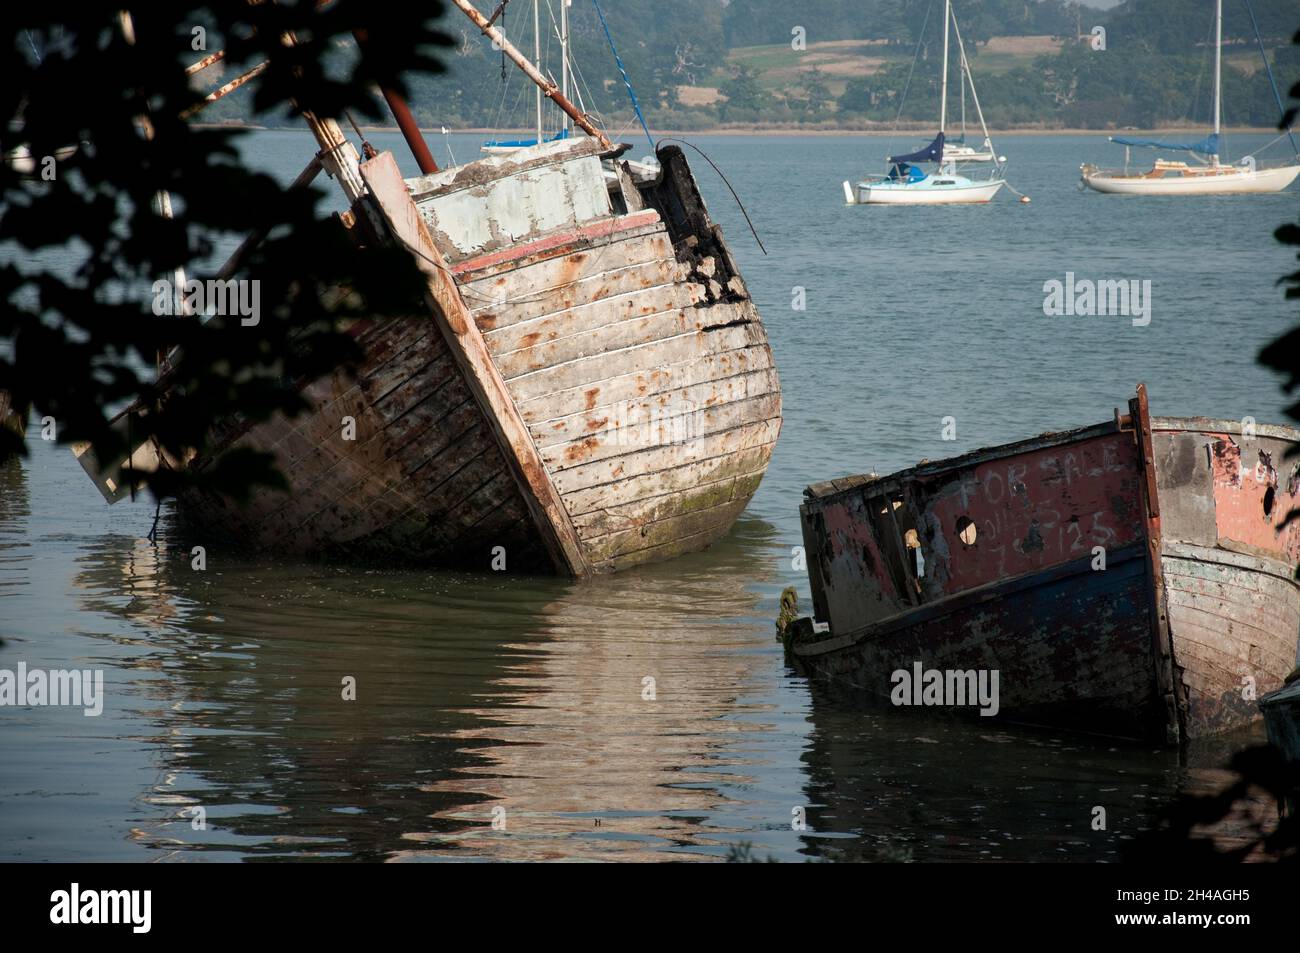 Ruined Boats on the River Orwell at Pin Mill, Suffolk, UK.  Badly damaged boats capsized. Yachts in the background. Stock Photo